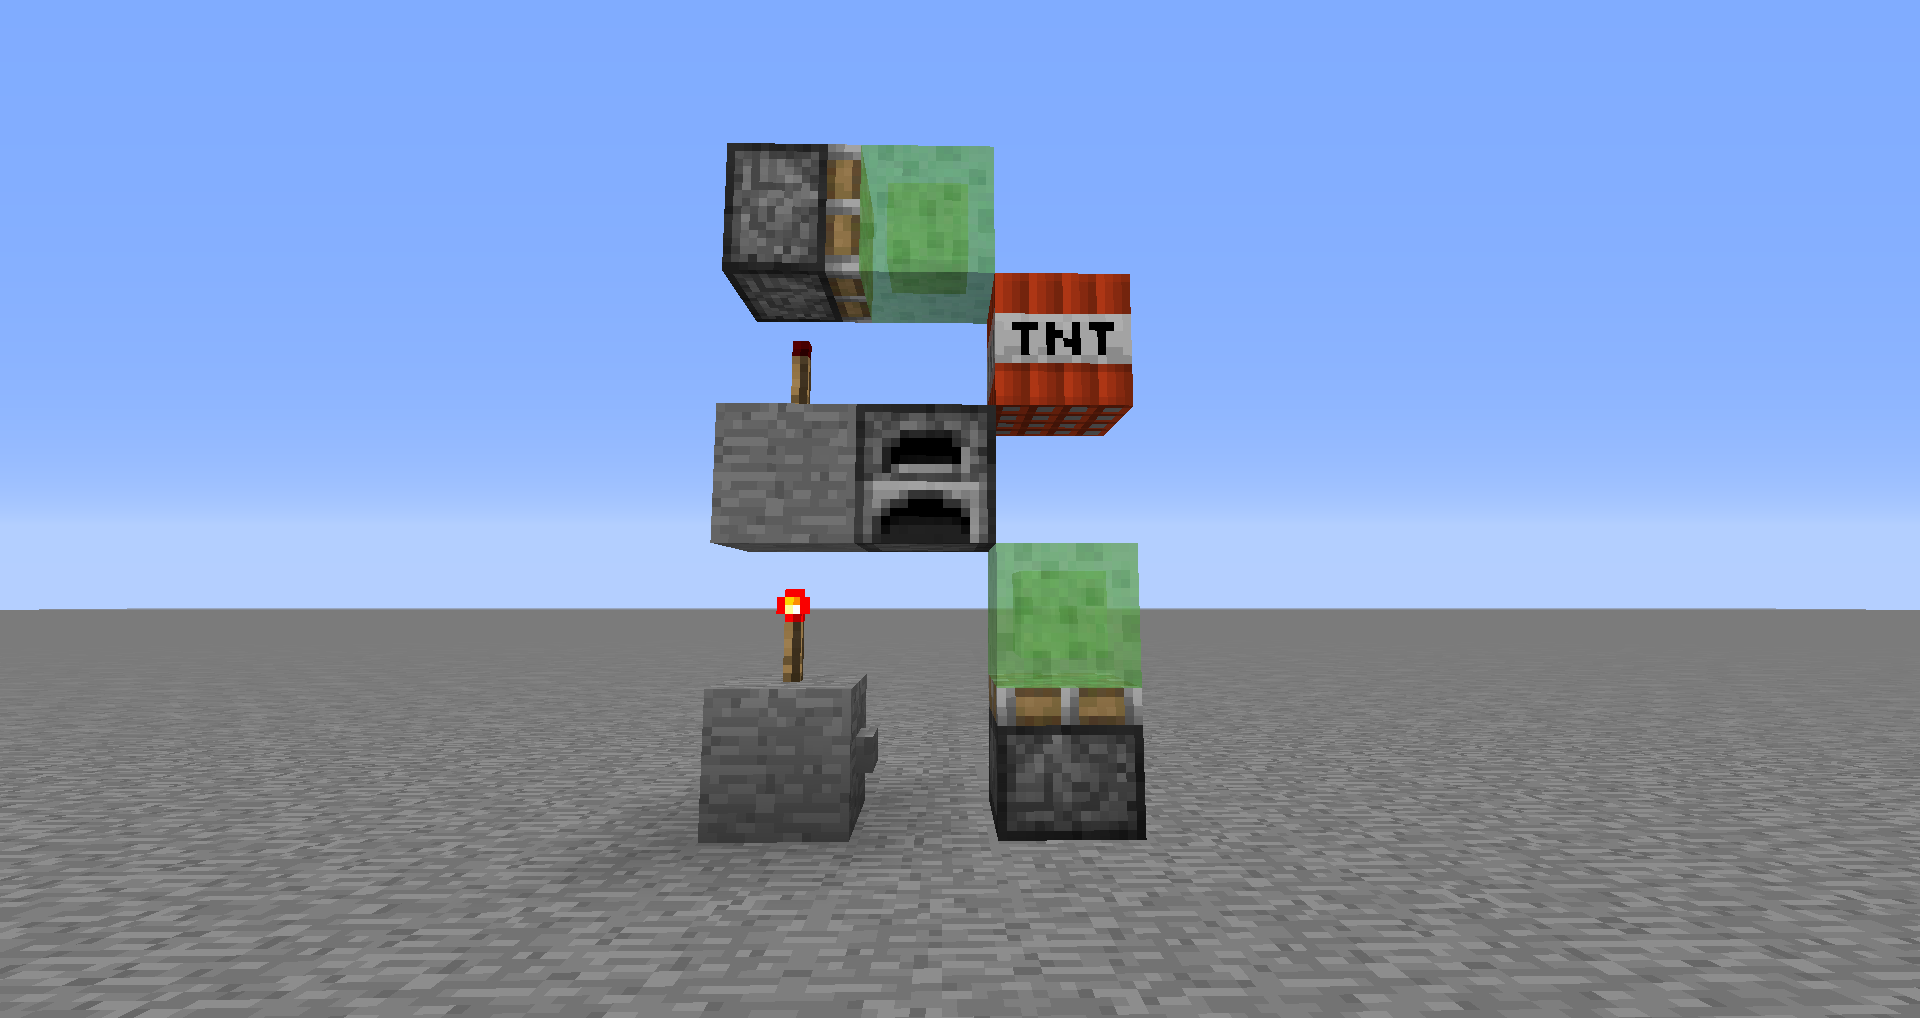 how to increase the height of a slime block launcher in minecraft